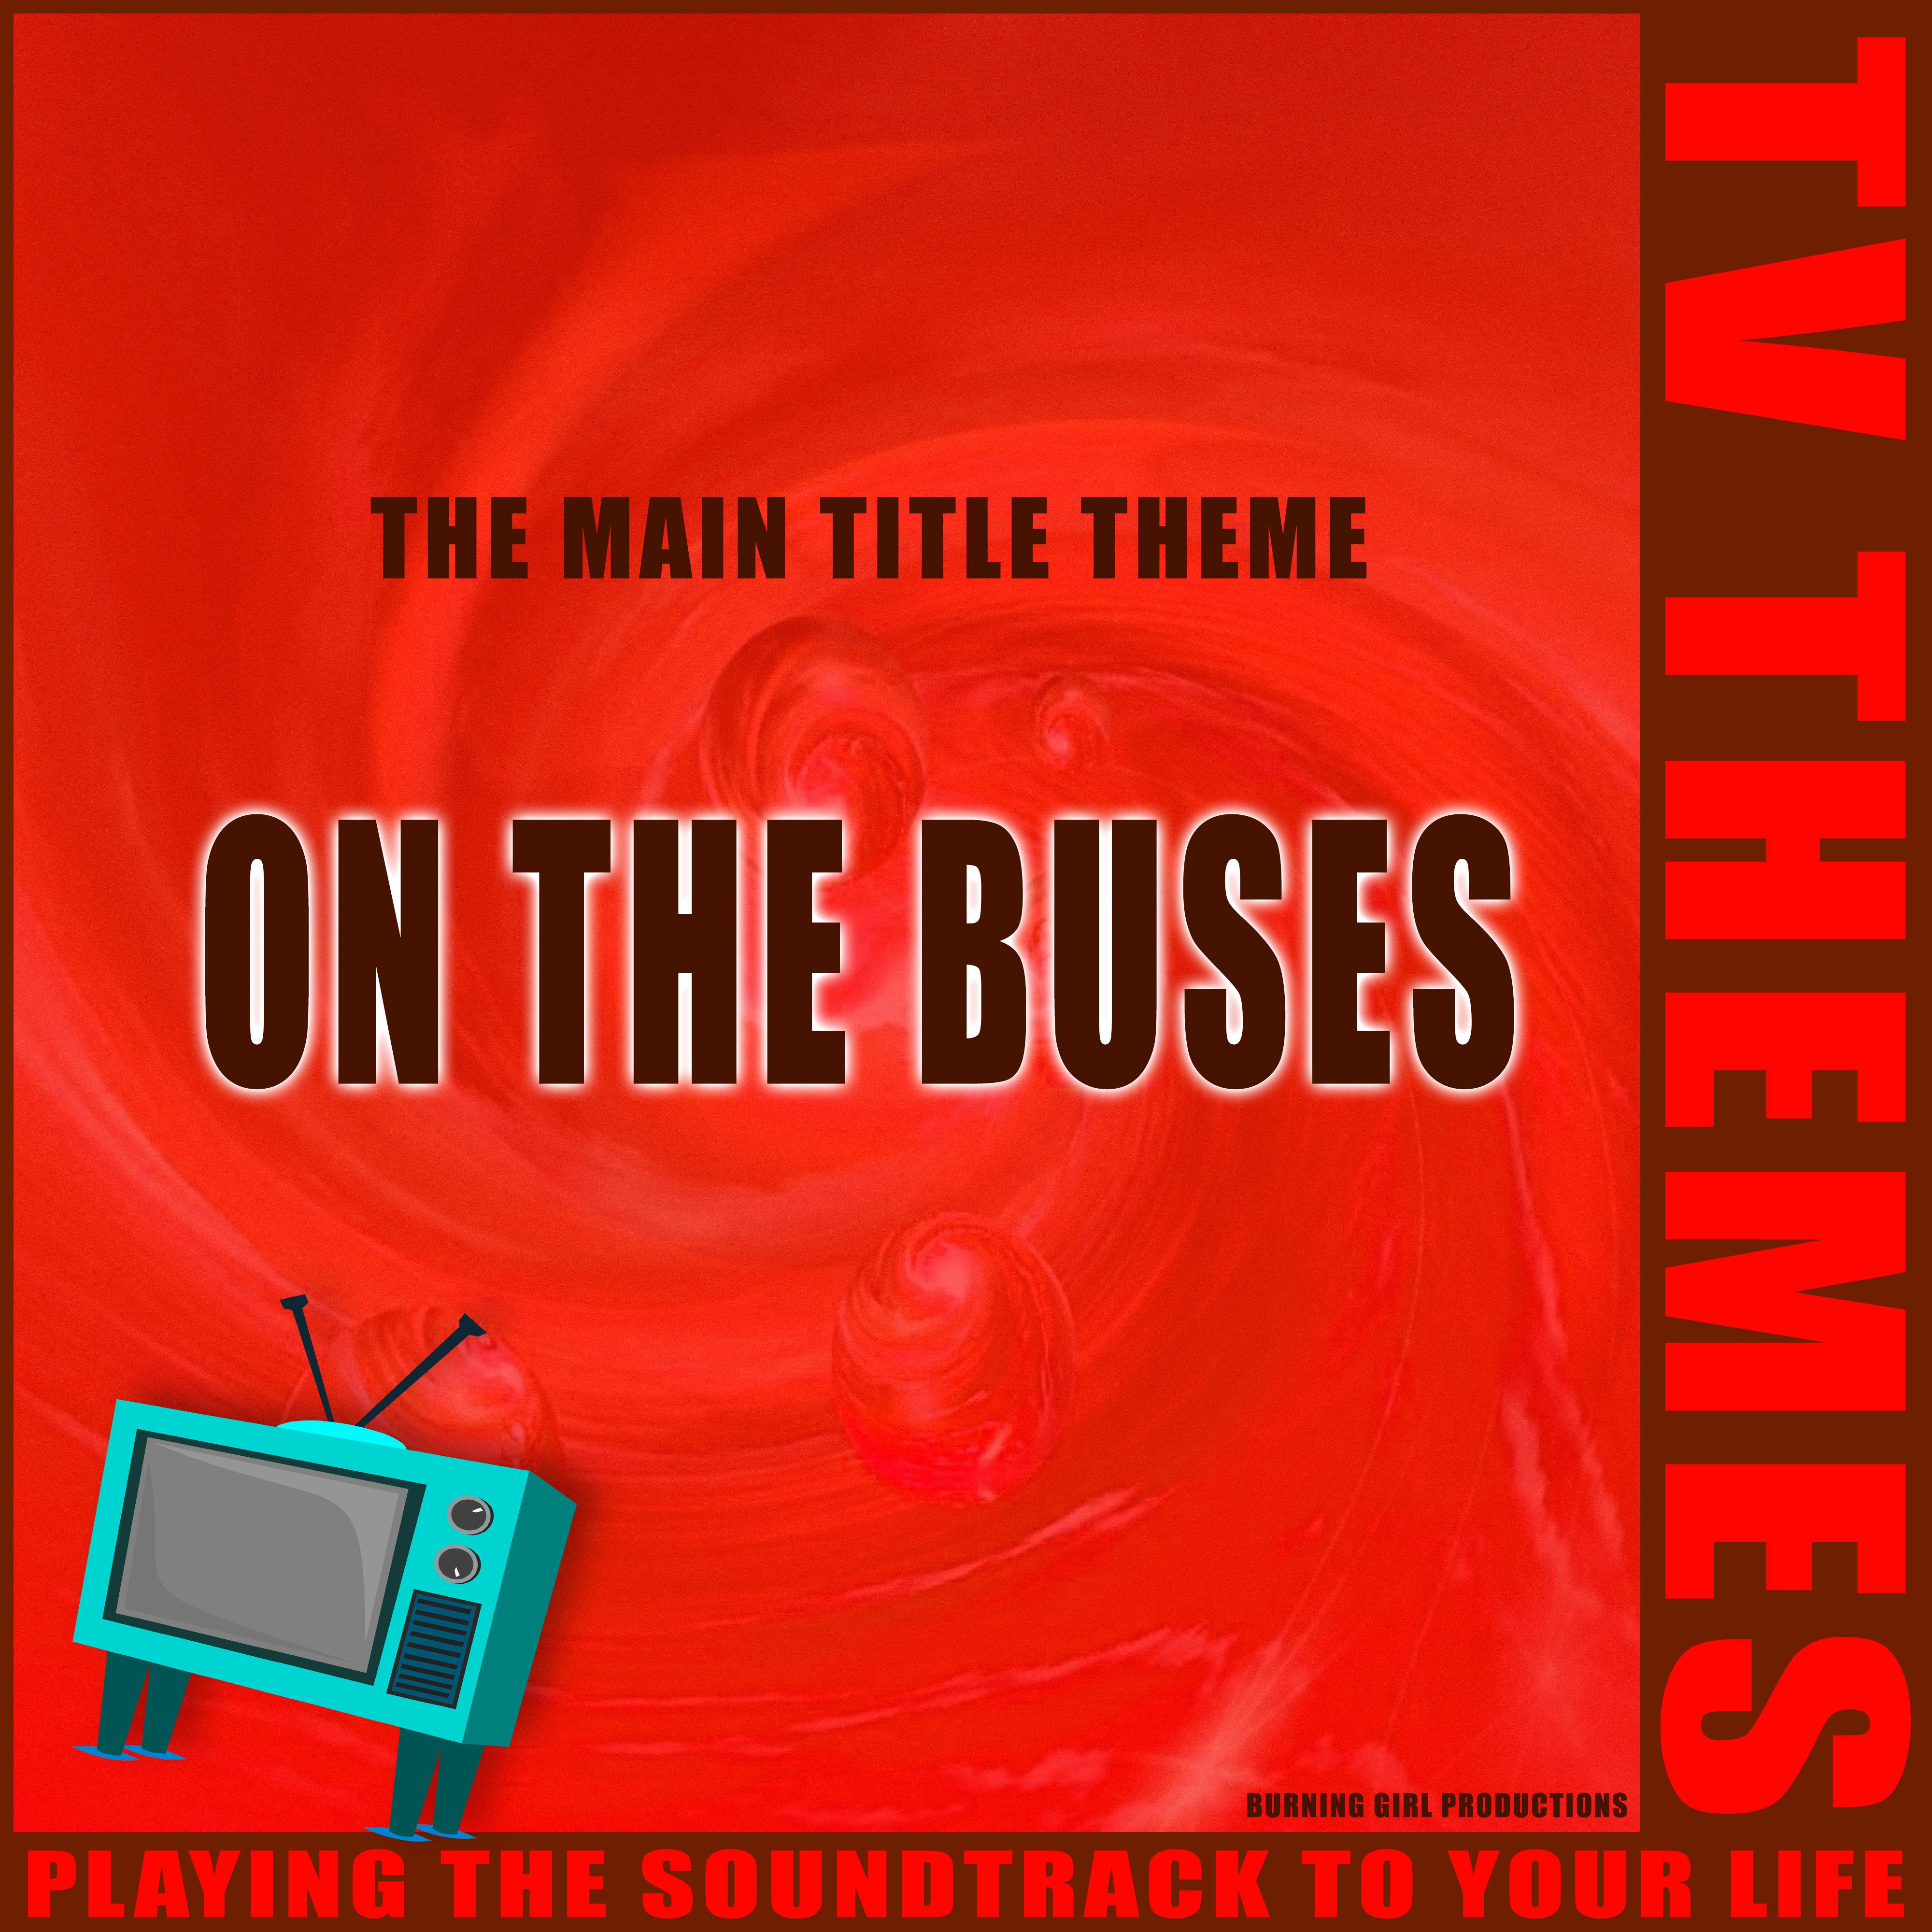 On The Buses - The Main Title Theme